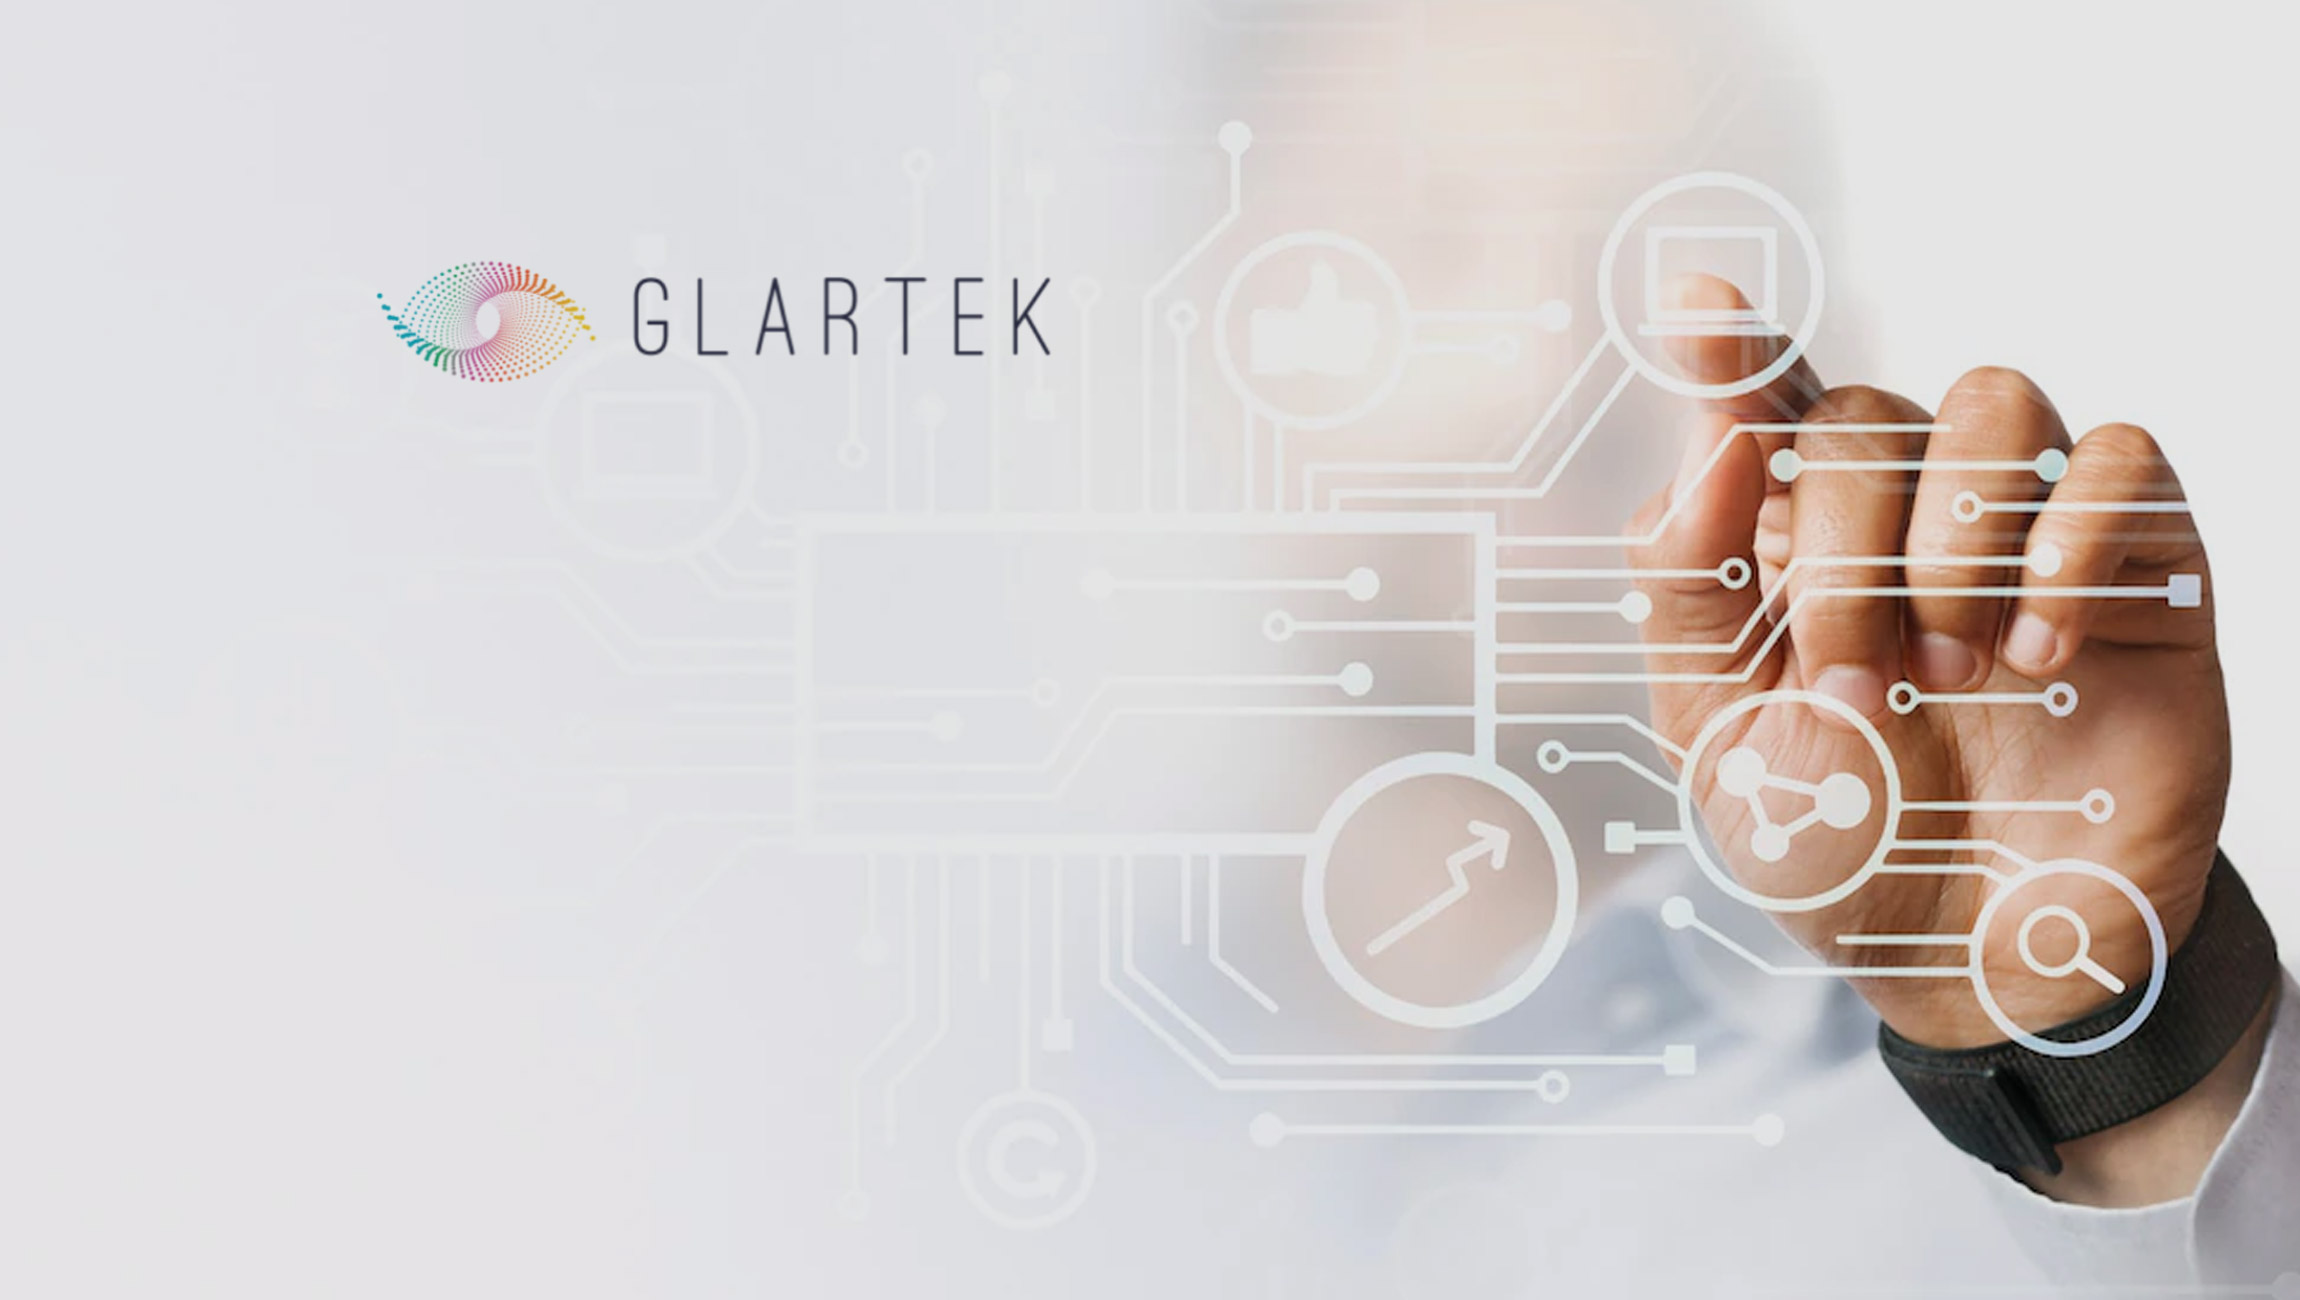 Glartek starts a new project to address new industrial use cases with Factory Digital Twins latest technology